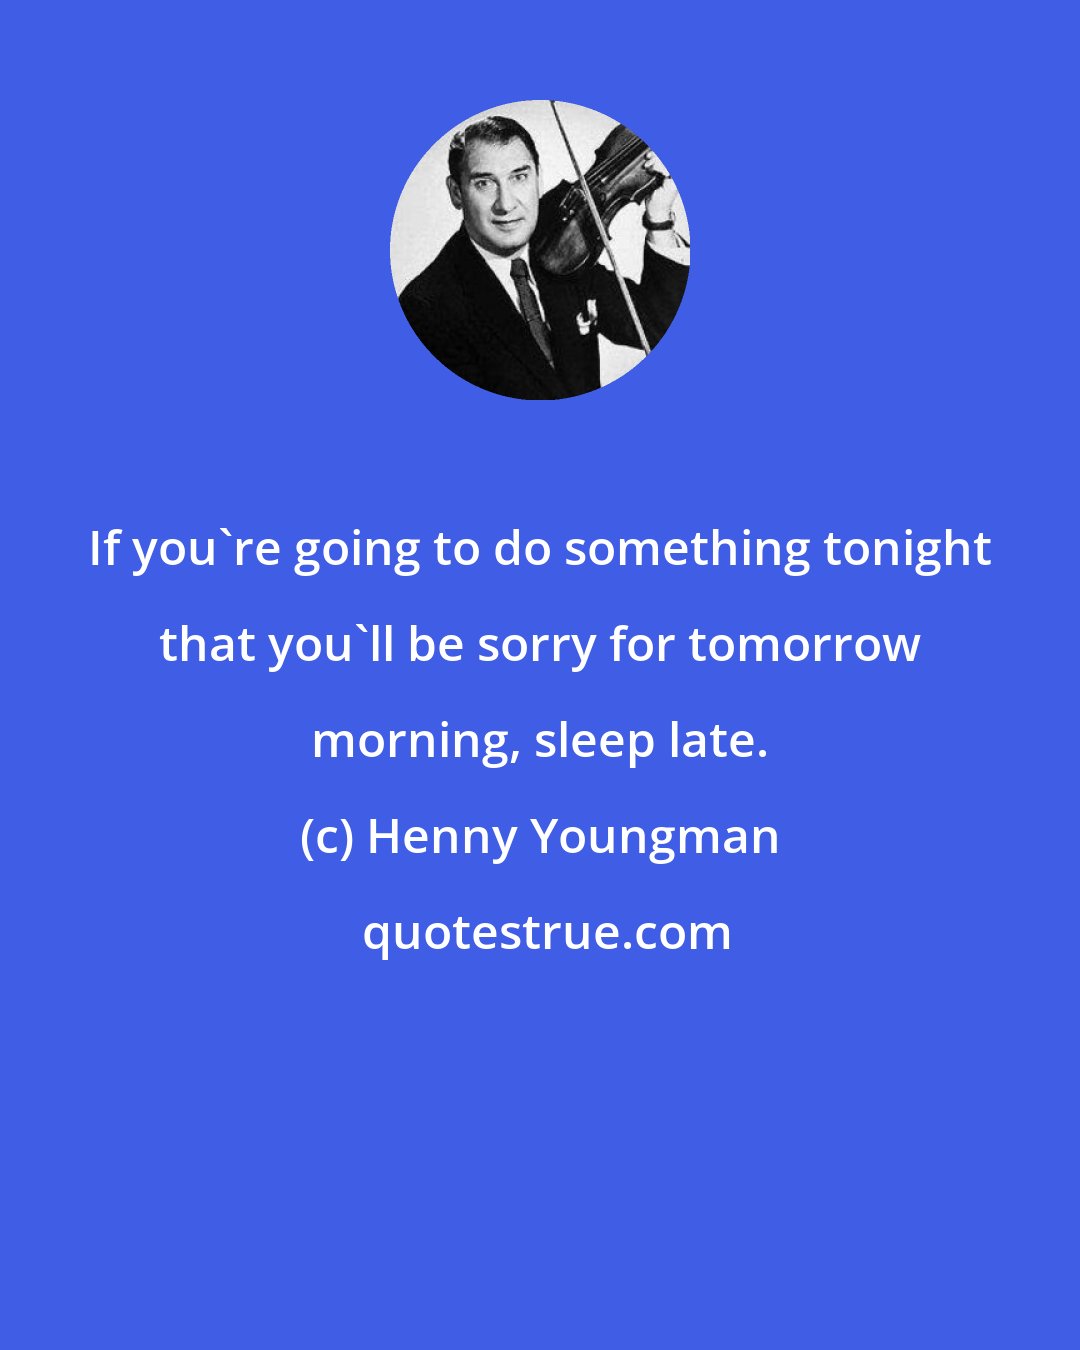 Henny Youngman: If you're going to do something tonight that you'll be sorry for tomorrow morning, sleep late.